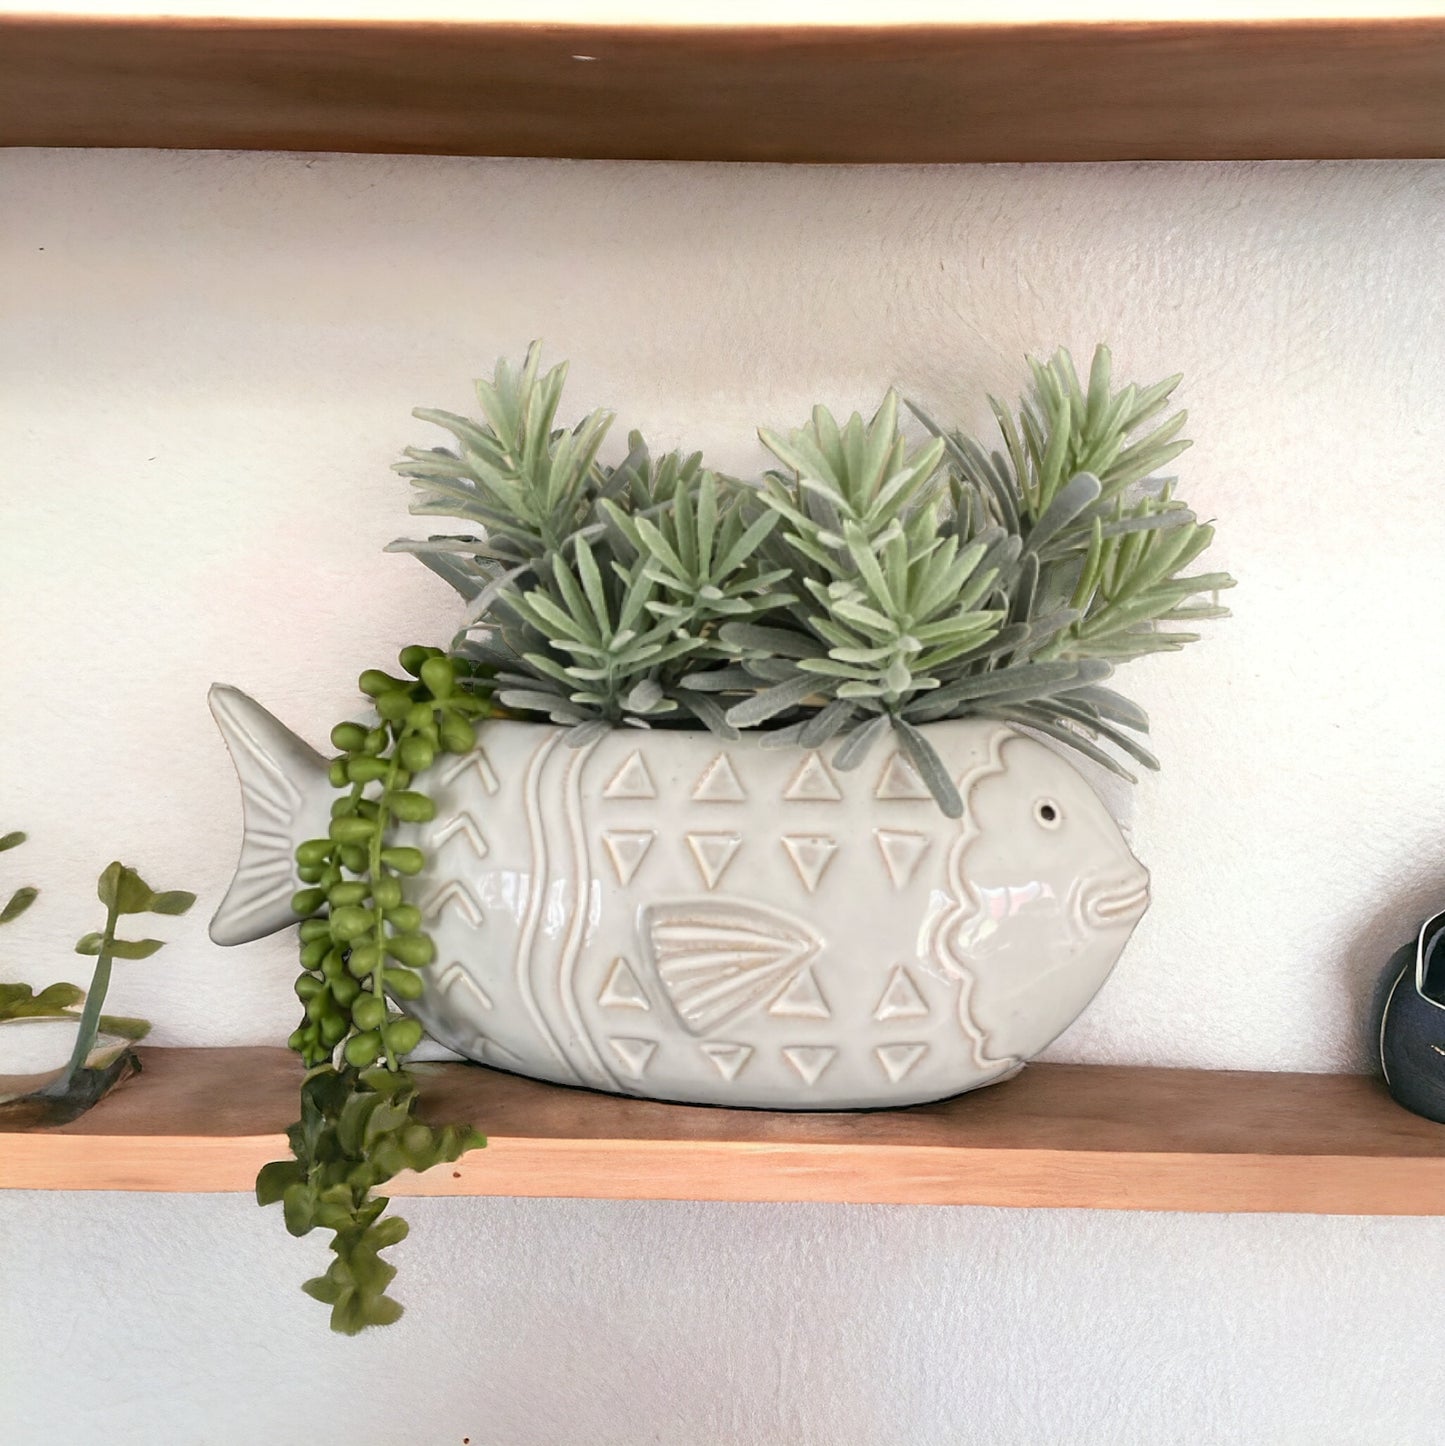 Fish Beach White Pot Plant Planter - The Renmy Store Homewares & Gifts 